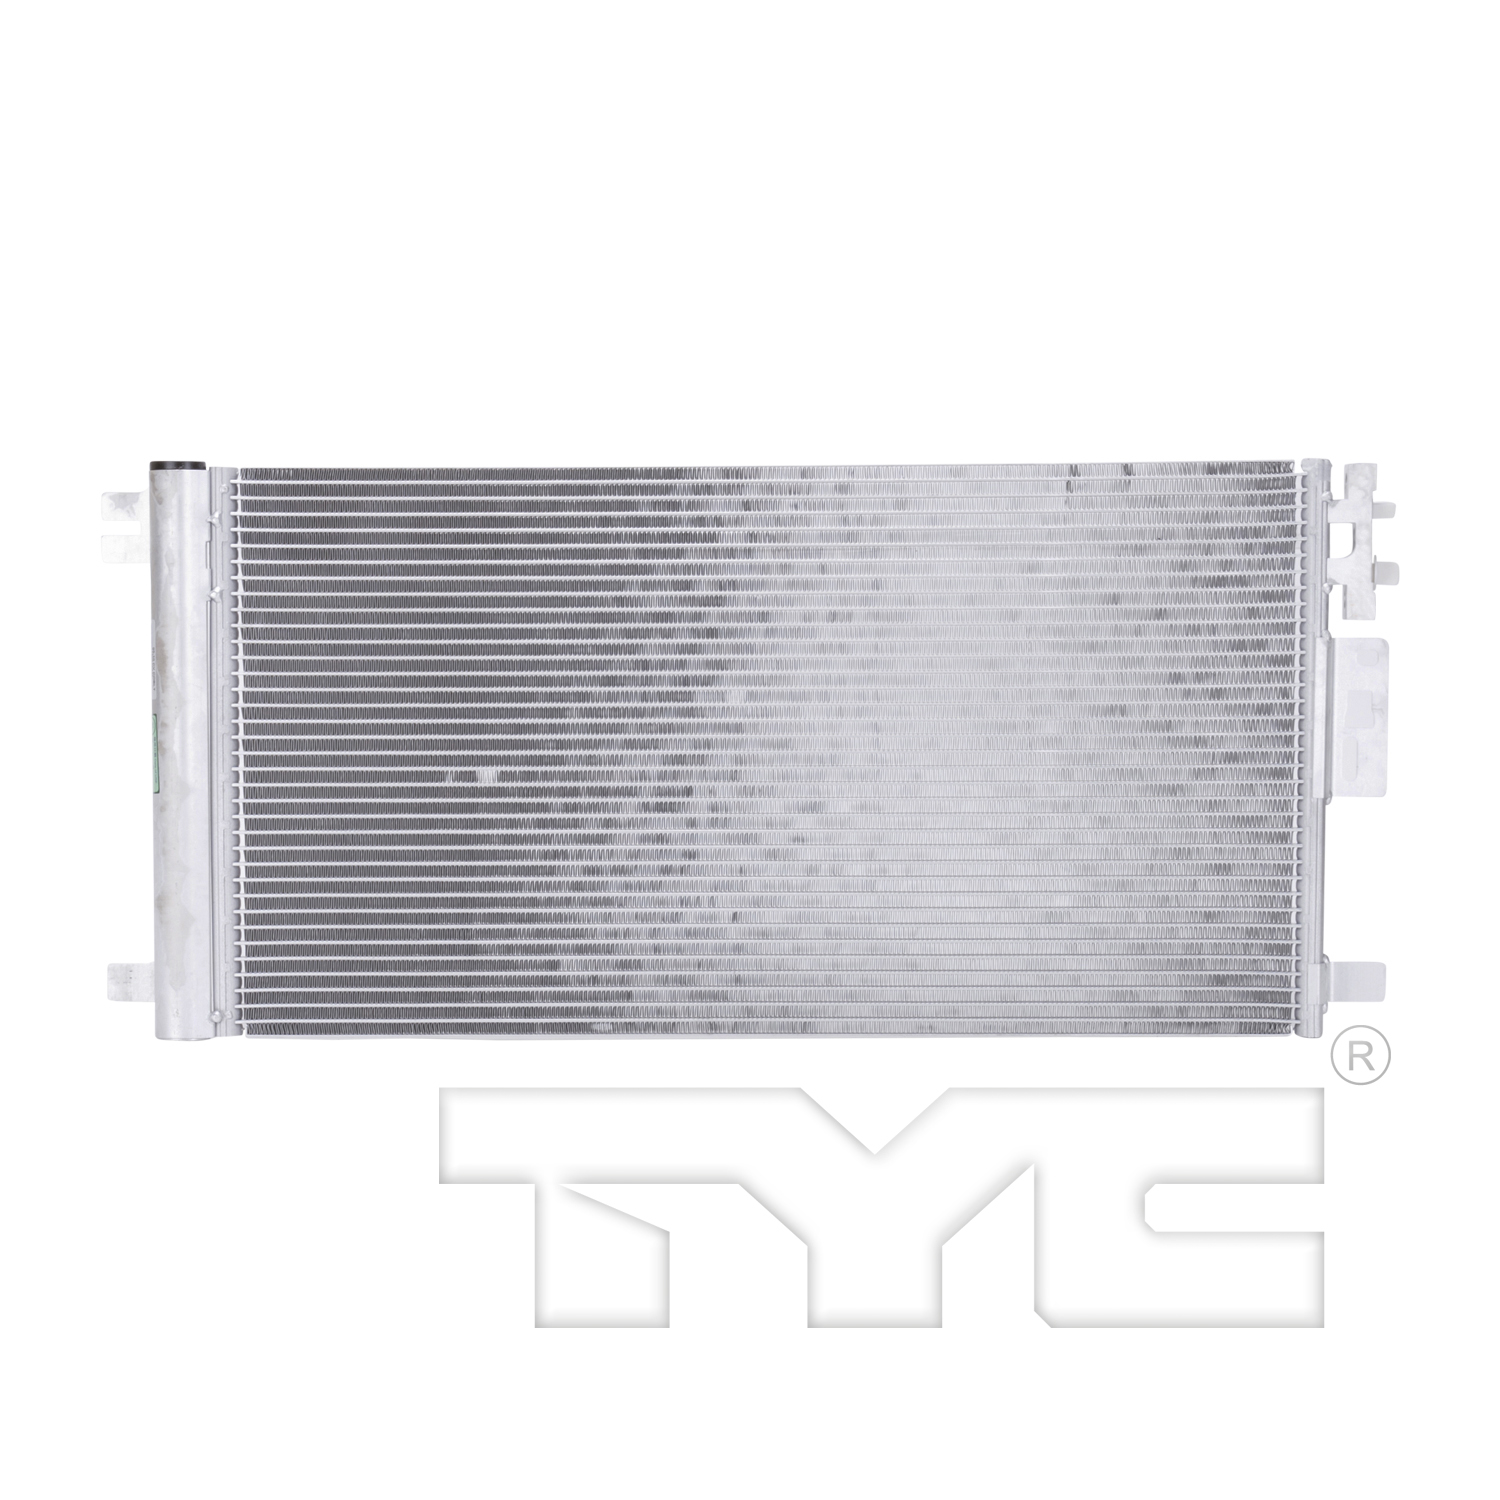 Aftermarket AC CONDENSERS for SATURN - ION, ION,03-07,Air conditioning condenser